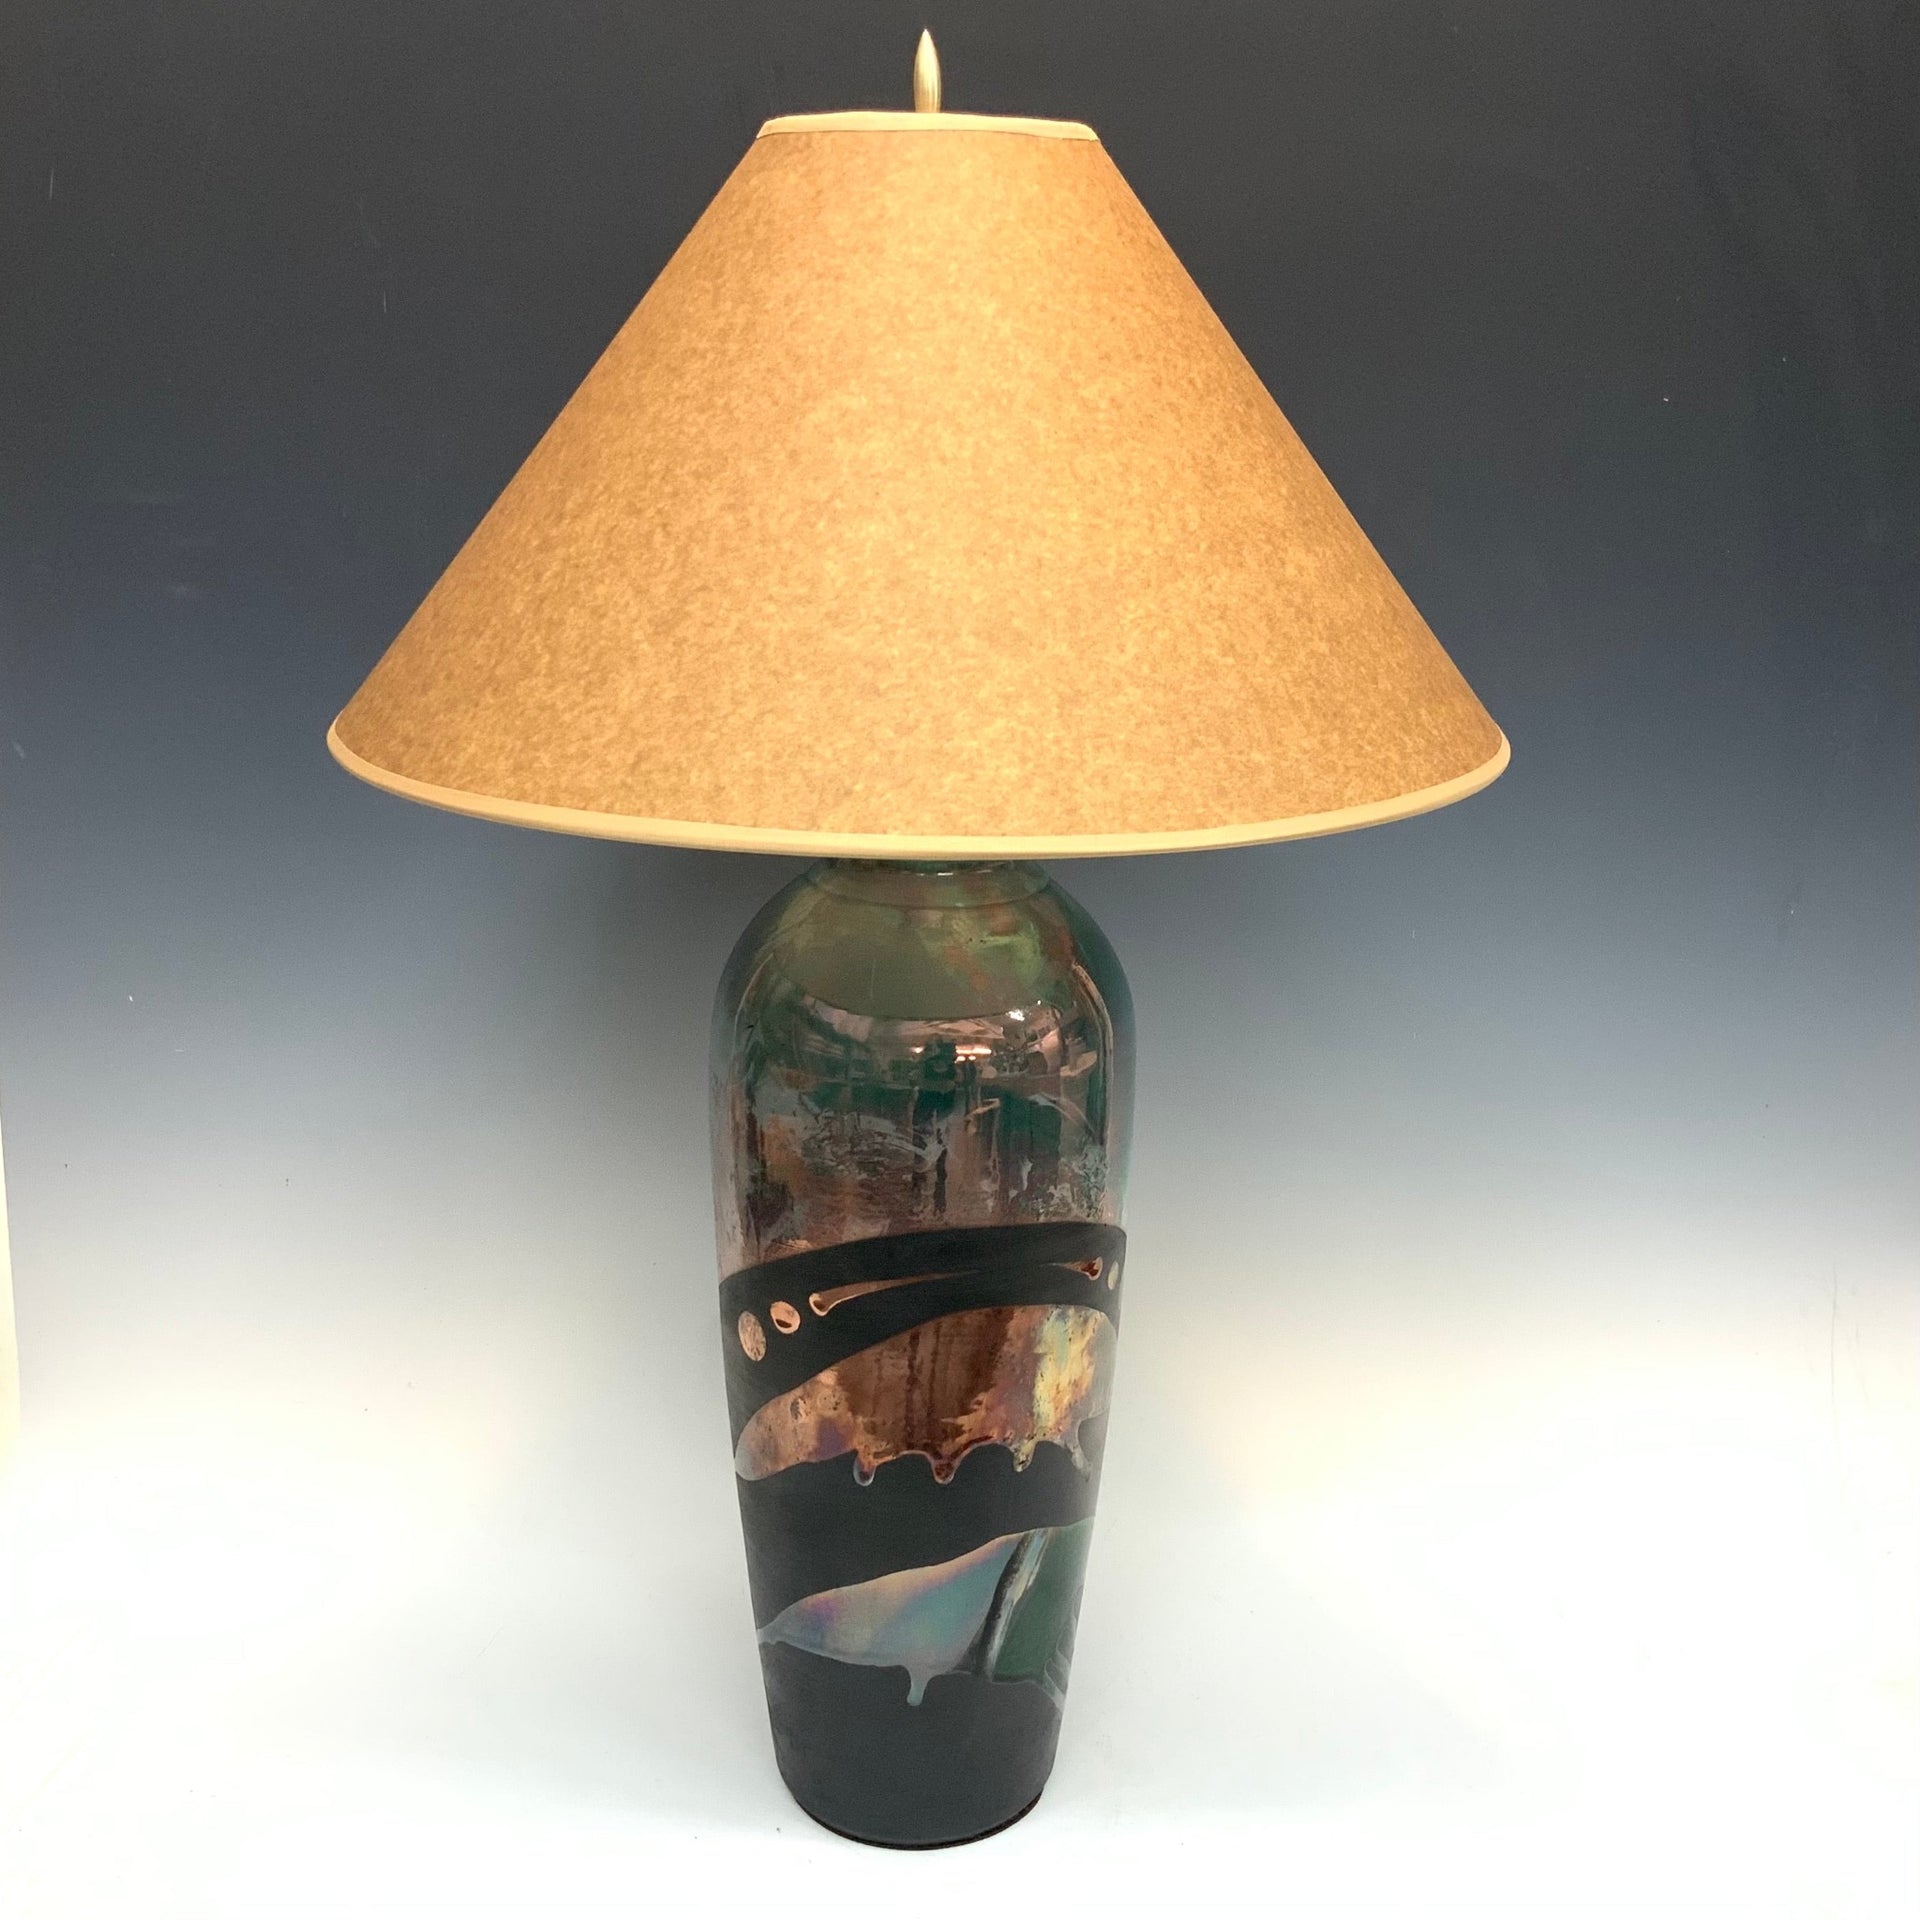 Raku lamp in teal and coppers